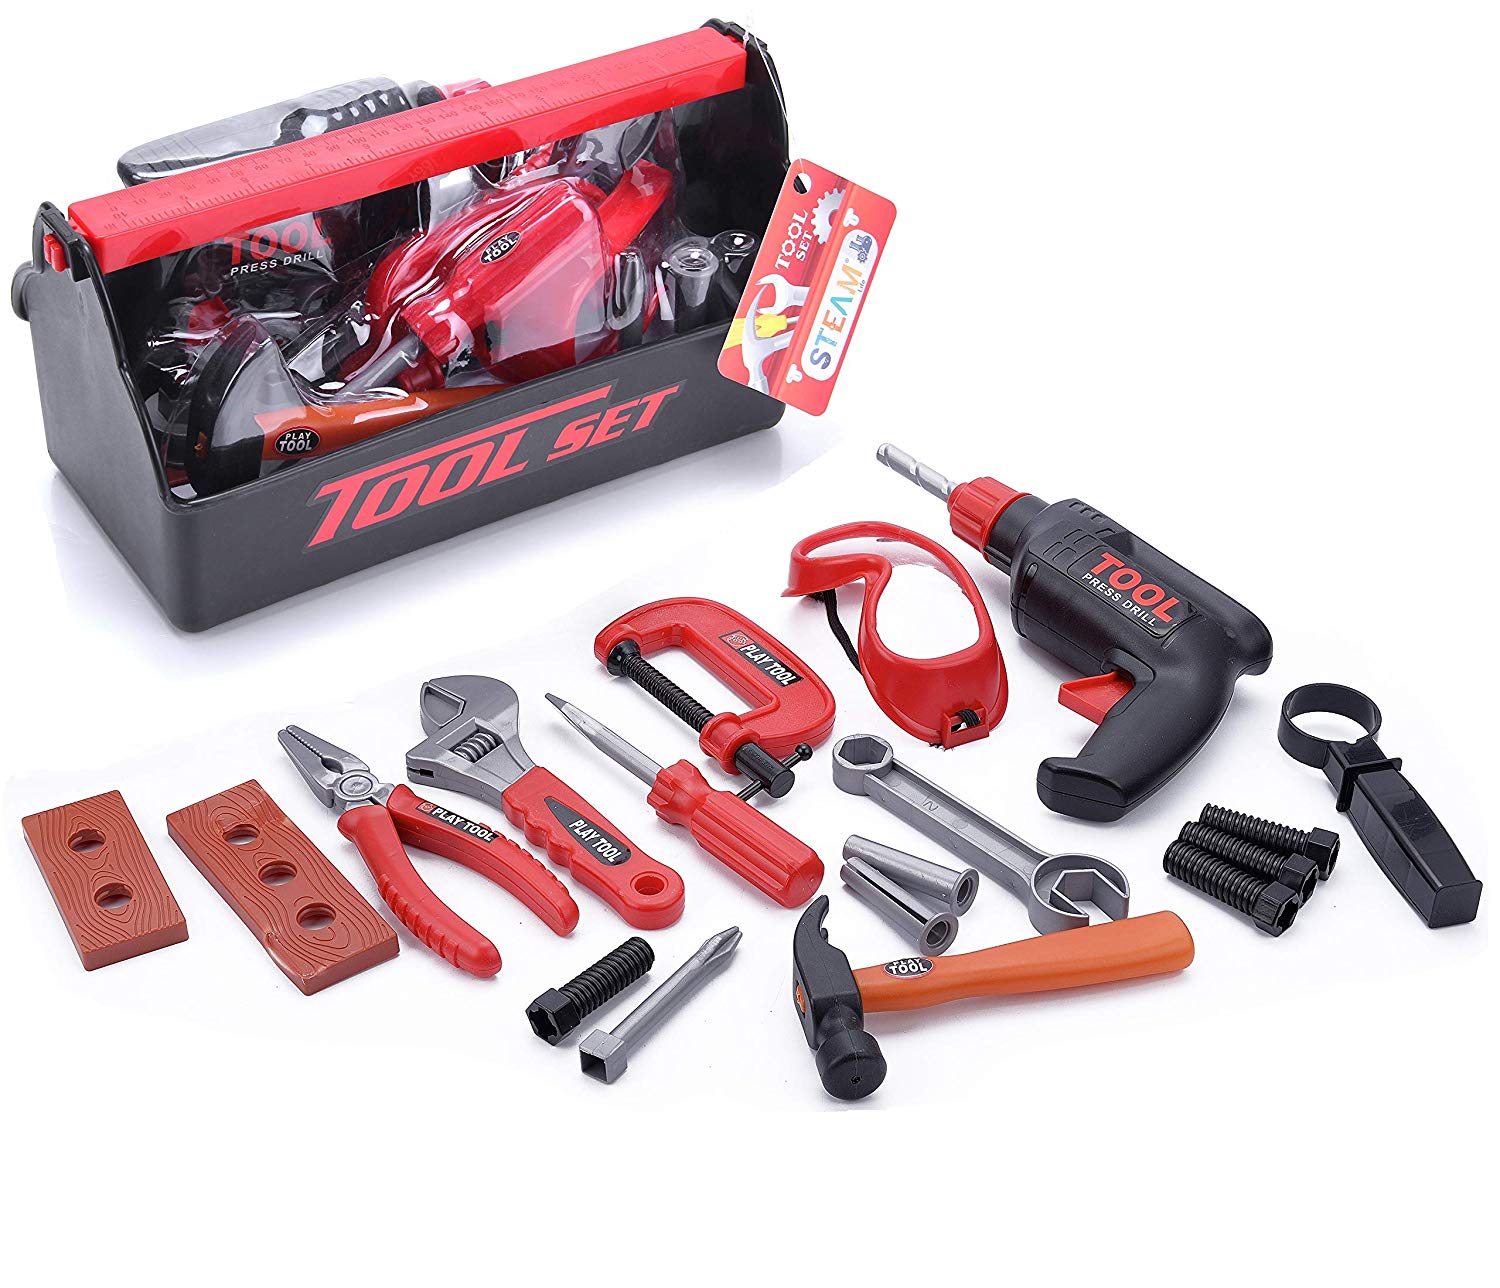 toy tool kit for 2 year old